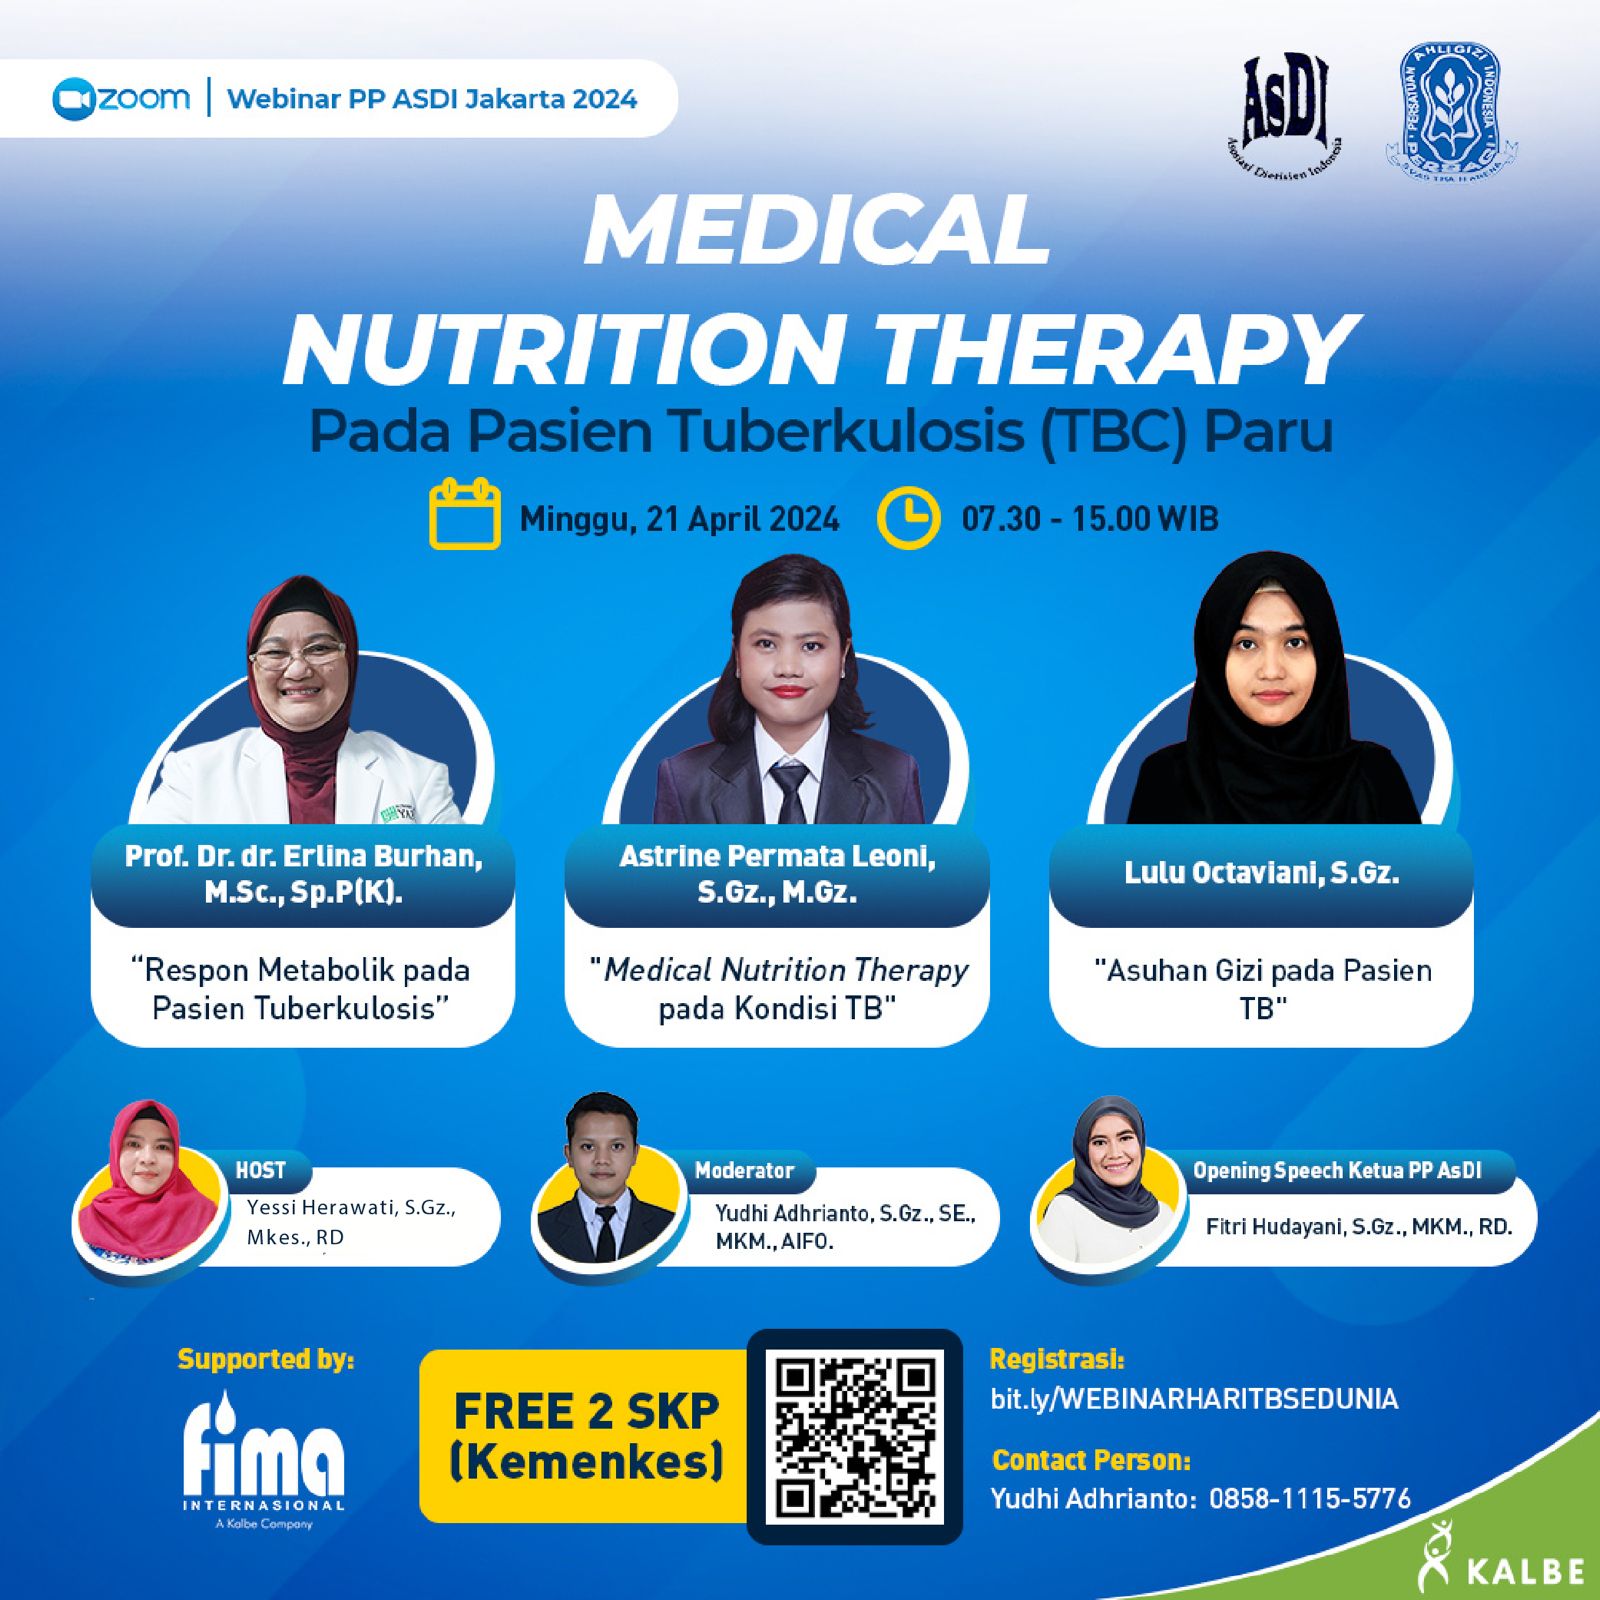 Medical Nutrition Therapy